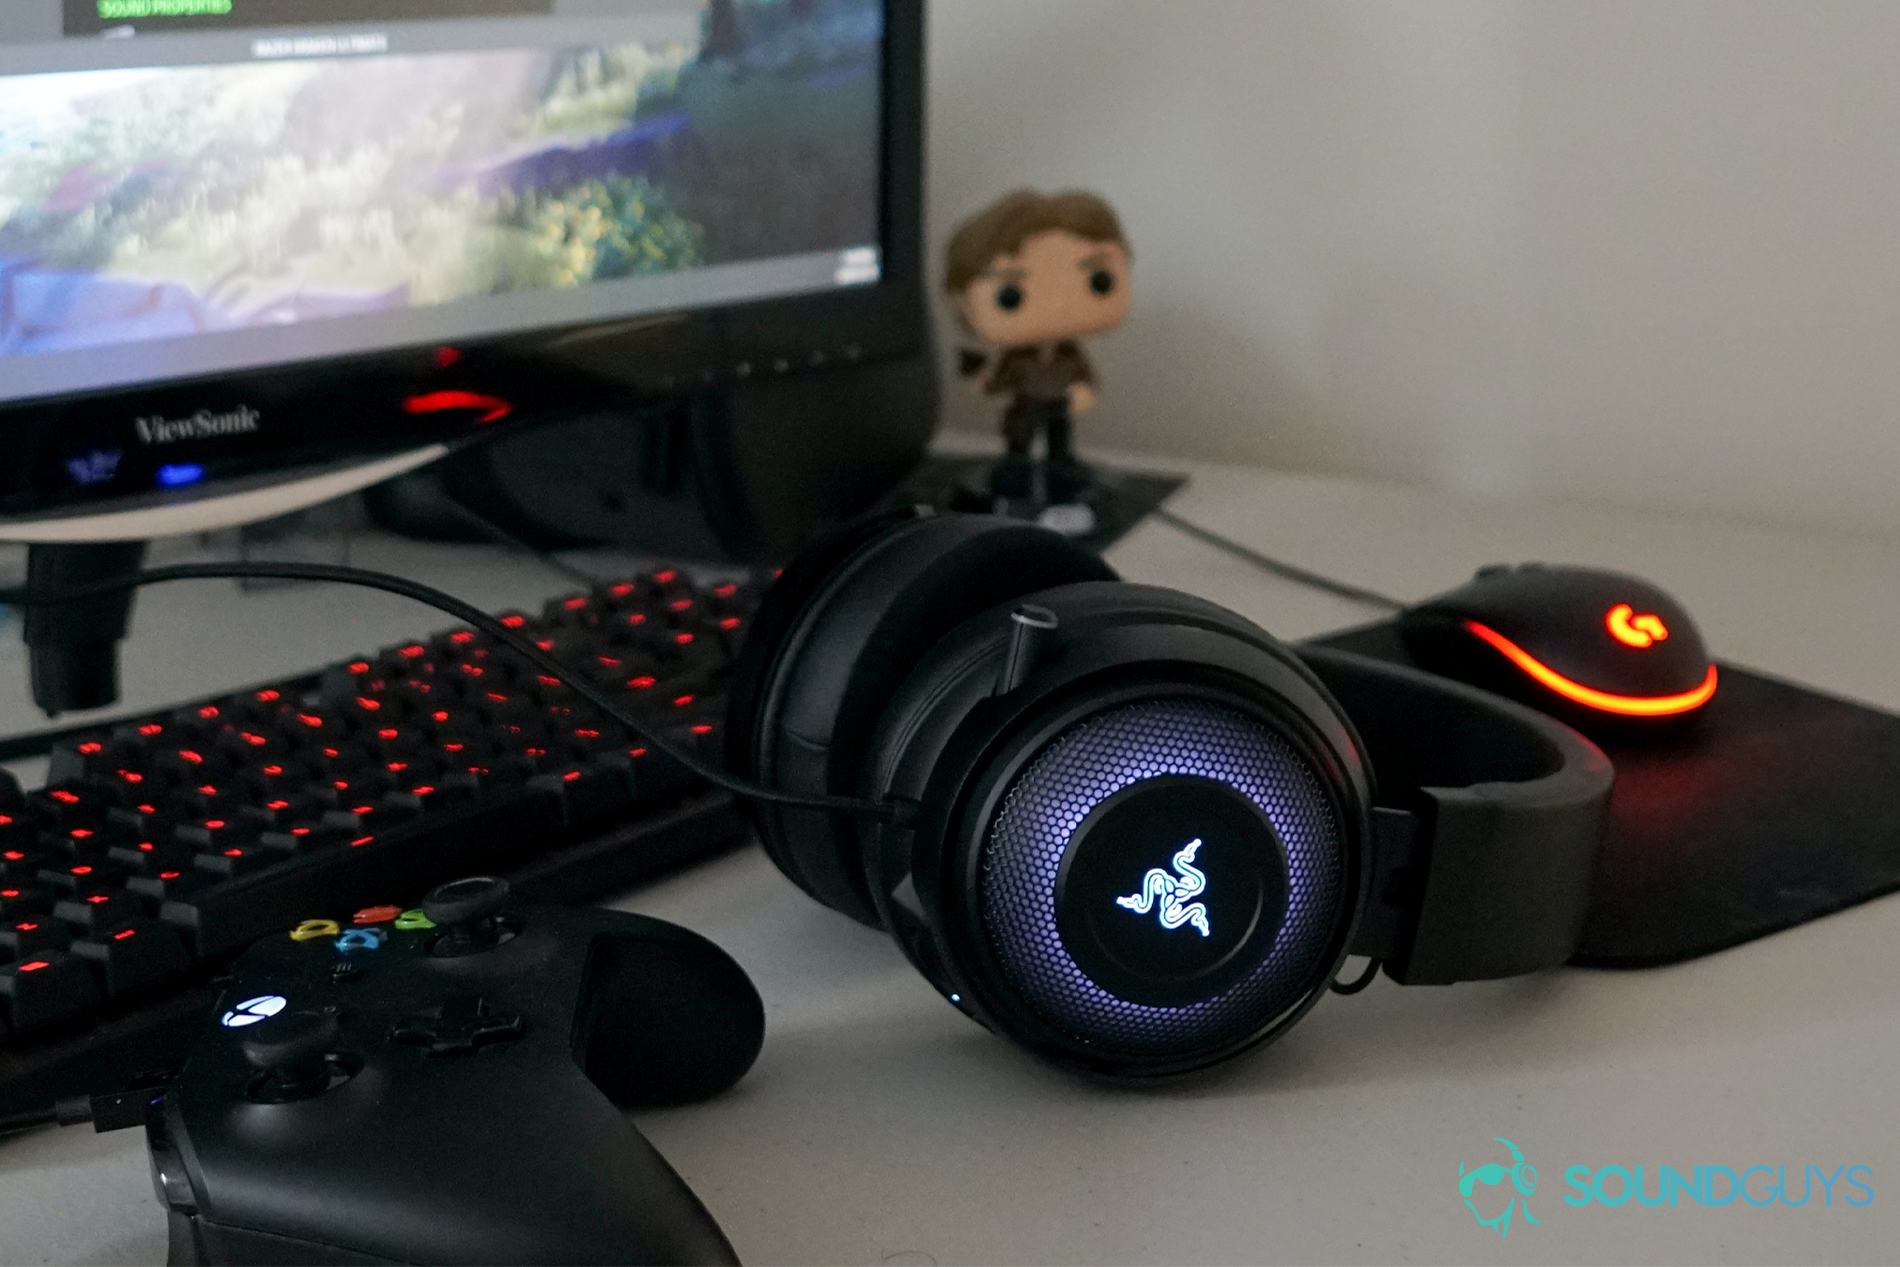 The Razer Kraken Ultimate sits on a desk in front of a PC, monitor, mouse, and keyboard, next to an Xbox One controller in front of a Han Solo doll.